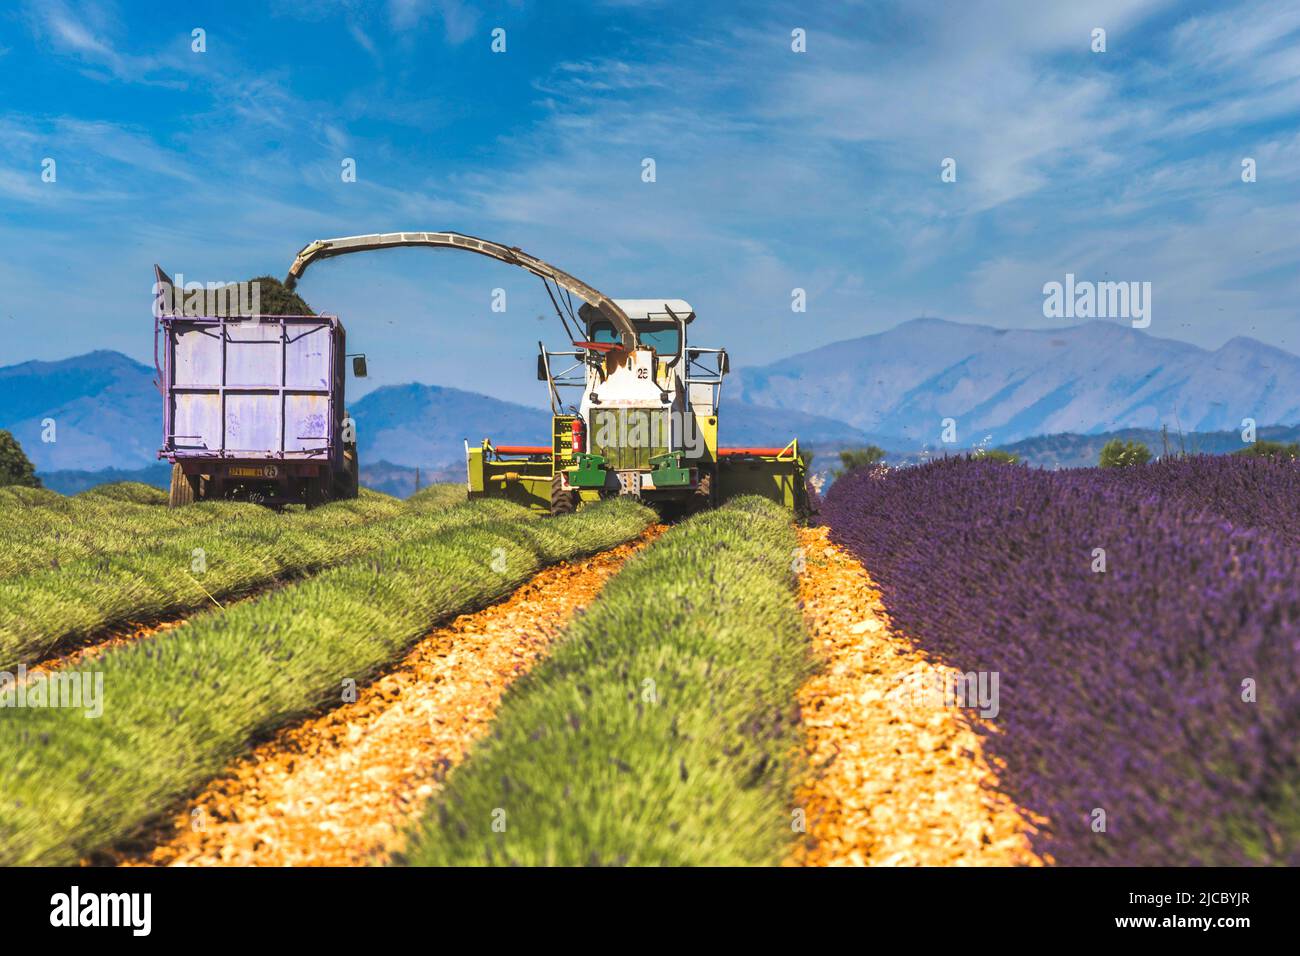 Lavender field harvesting near Valensole in Provence France, Europe Stock Photo